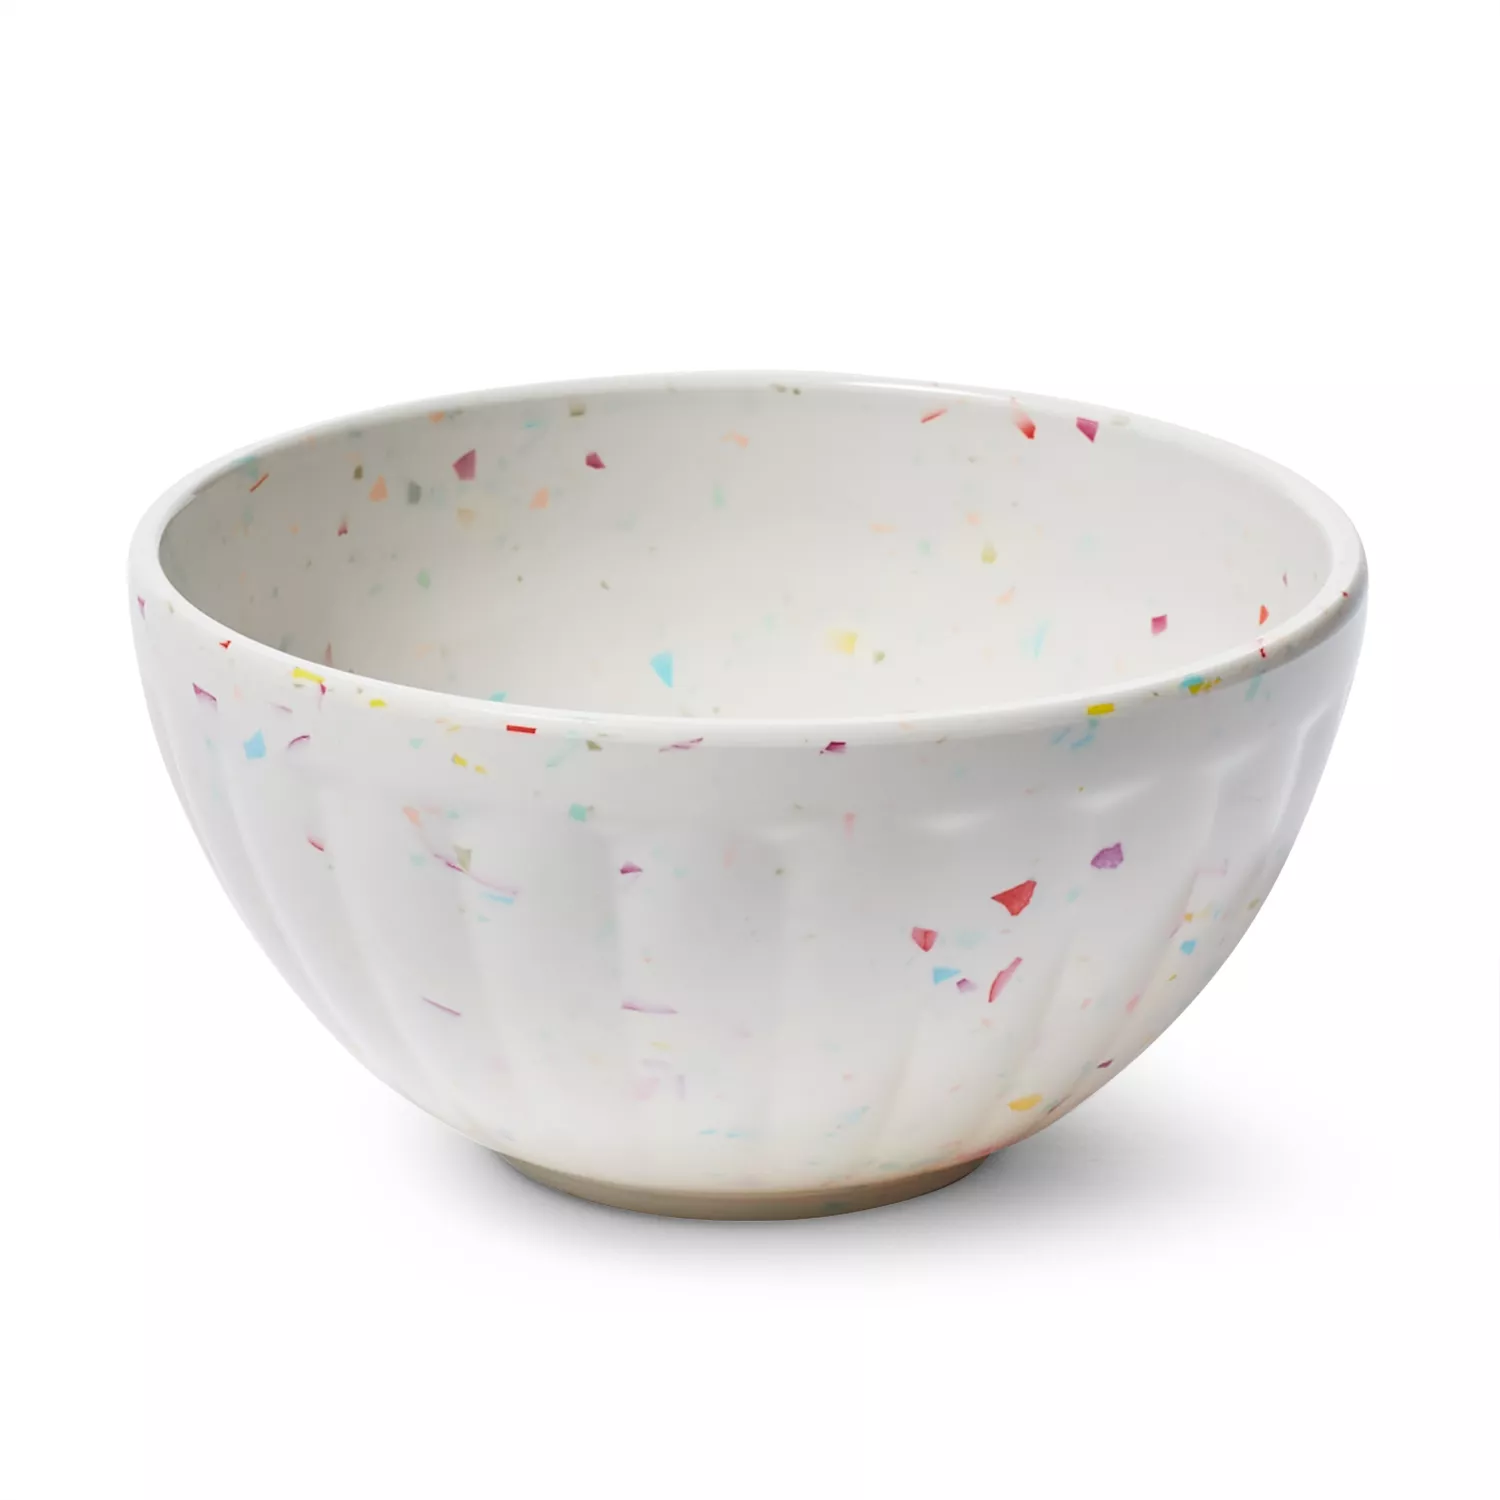 Cute Hand-painted Fruit Lemon Designed Ceramic Small Bowls For Ice